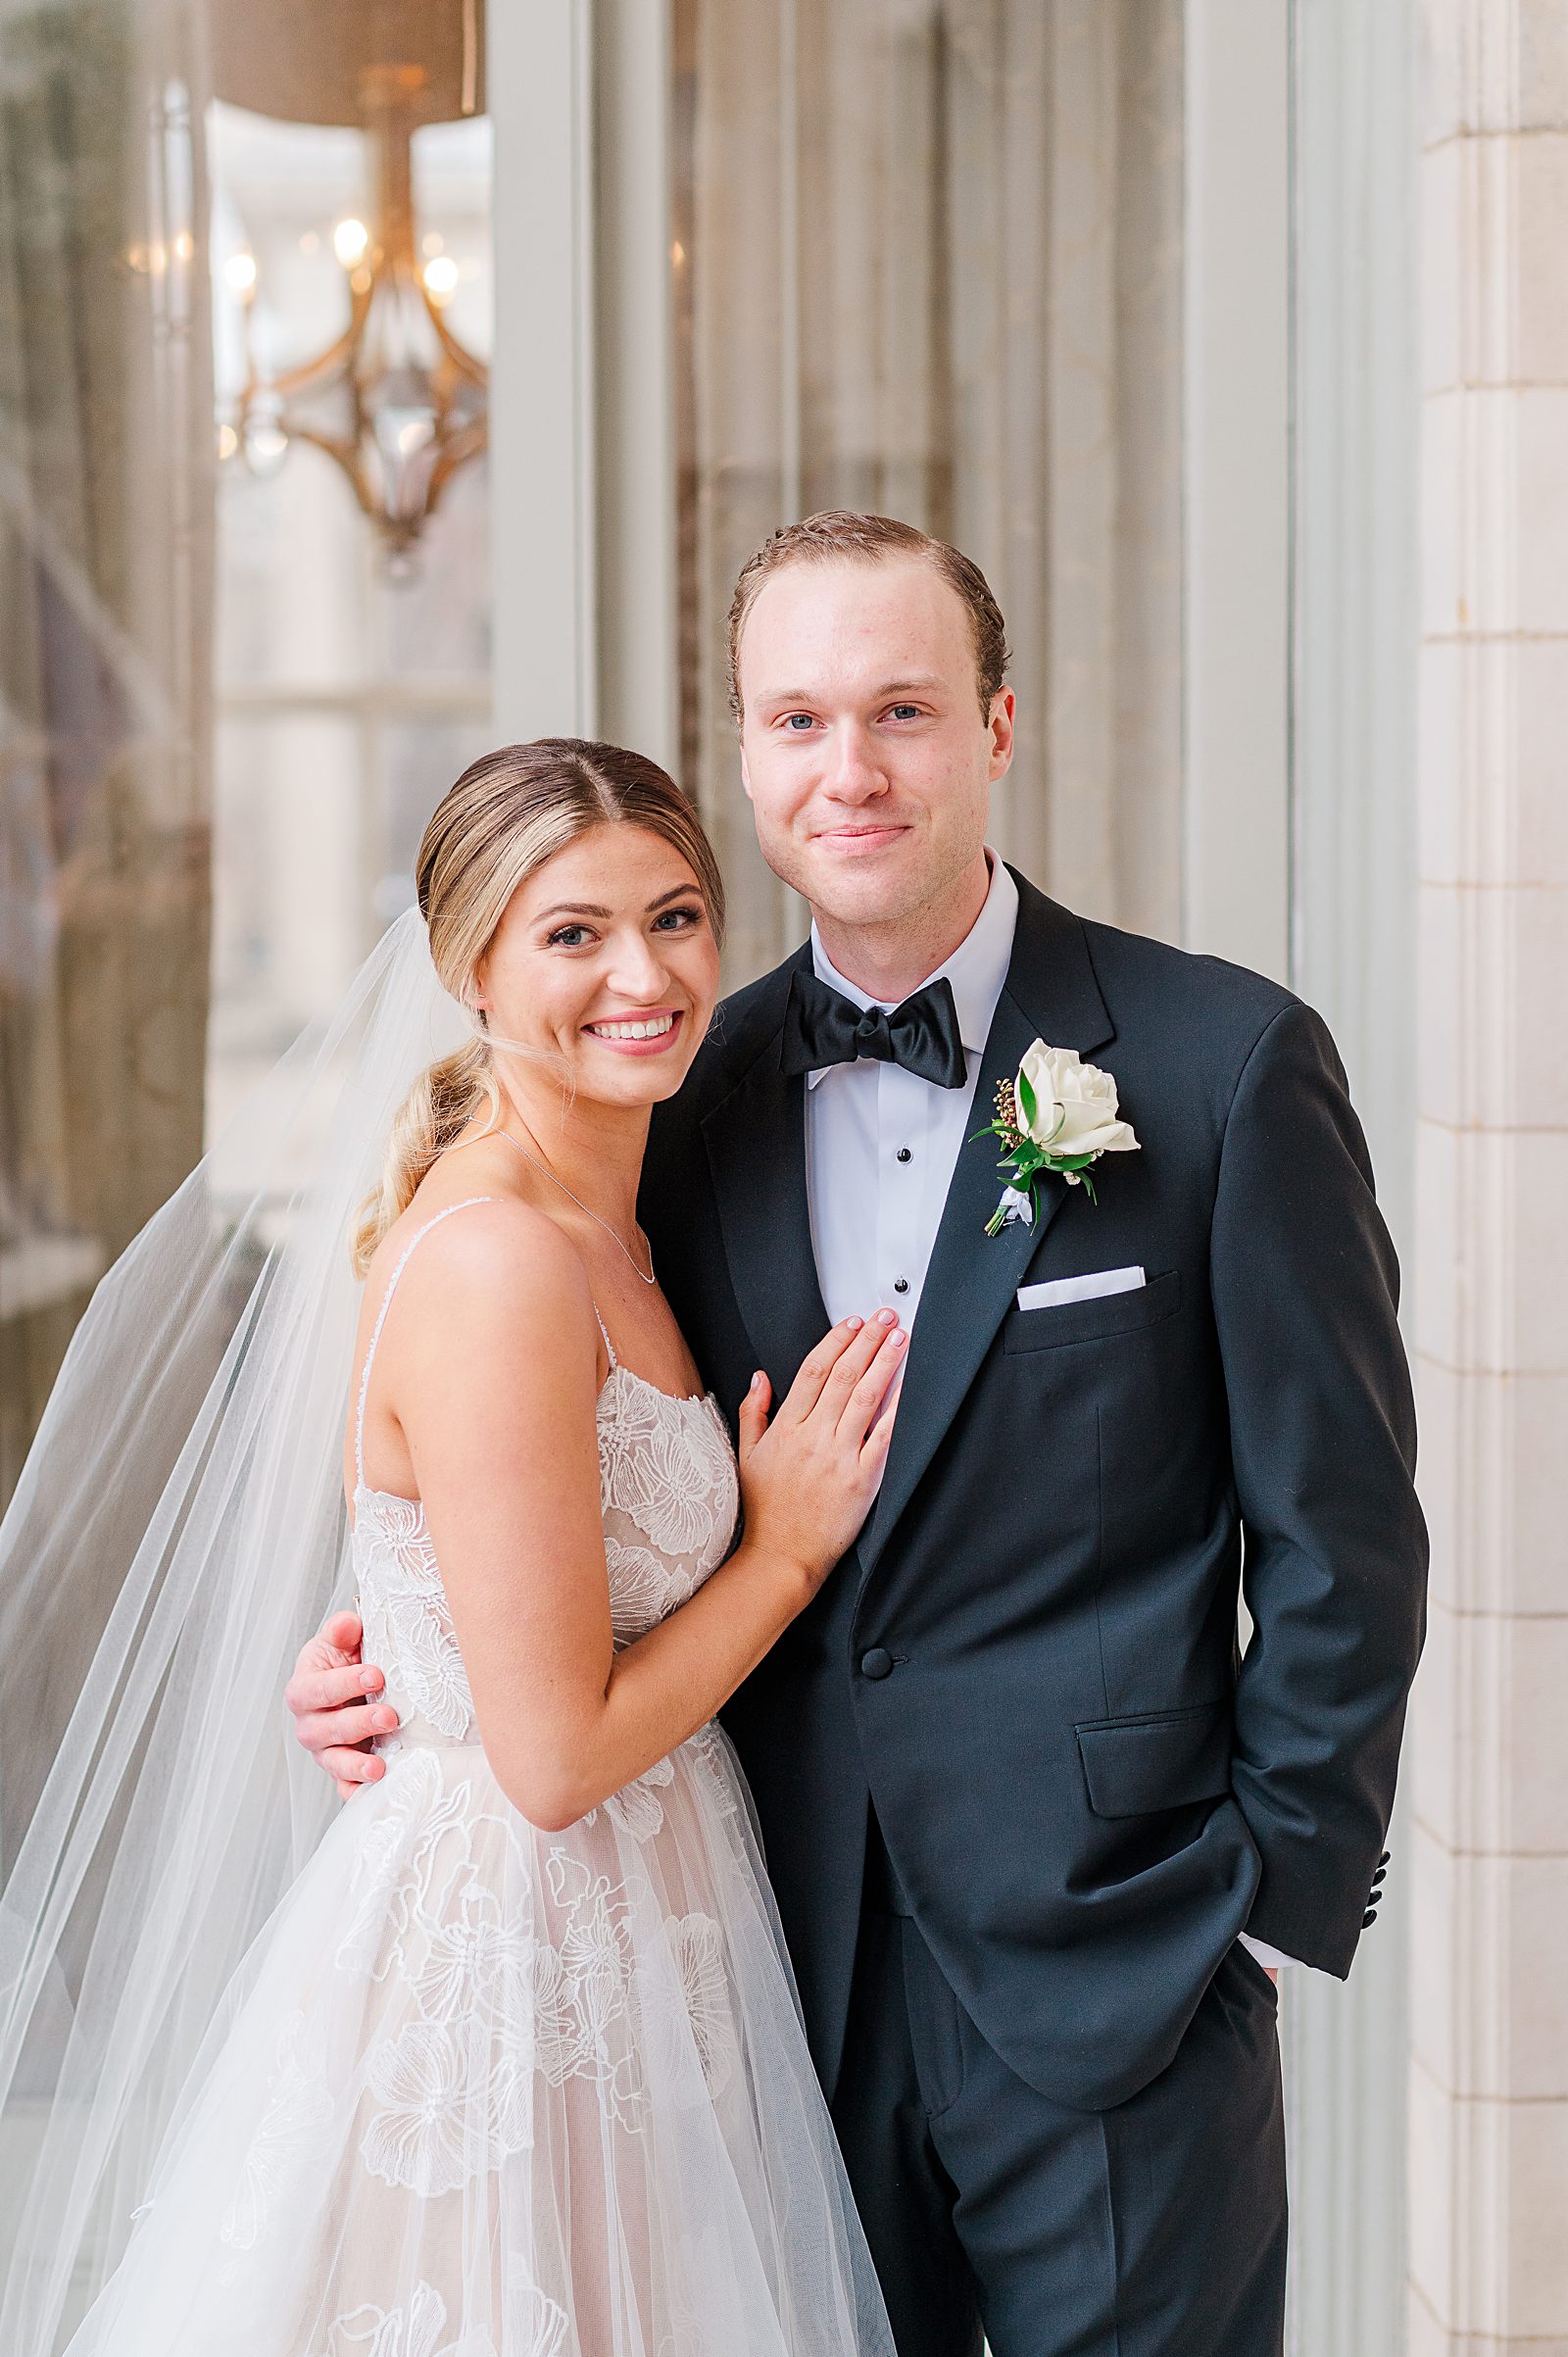 Bride and Groom Portraits with veil at Jefferson Hotel Winter Wedding. Virginia Wedding Photographer Kailey Brianne Photography